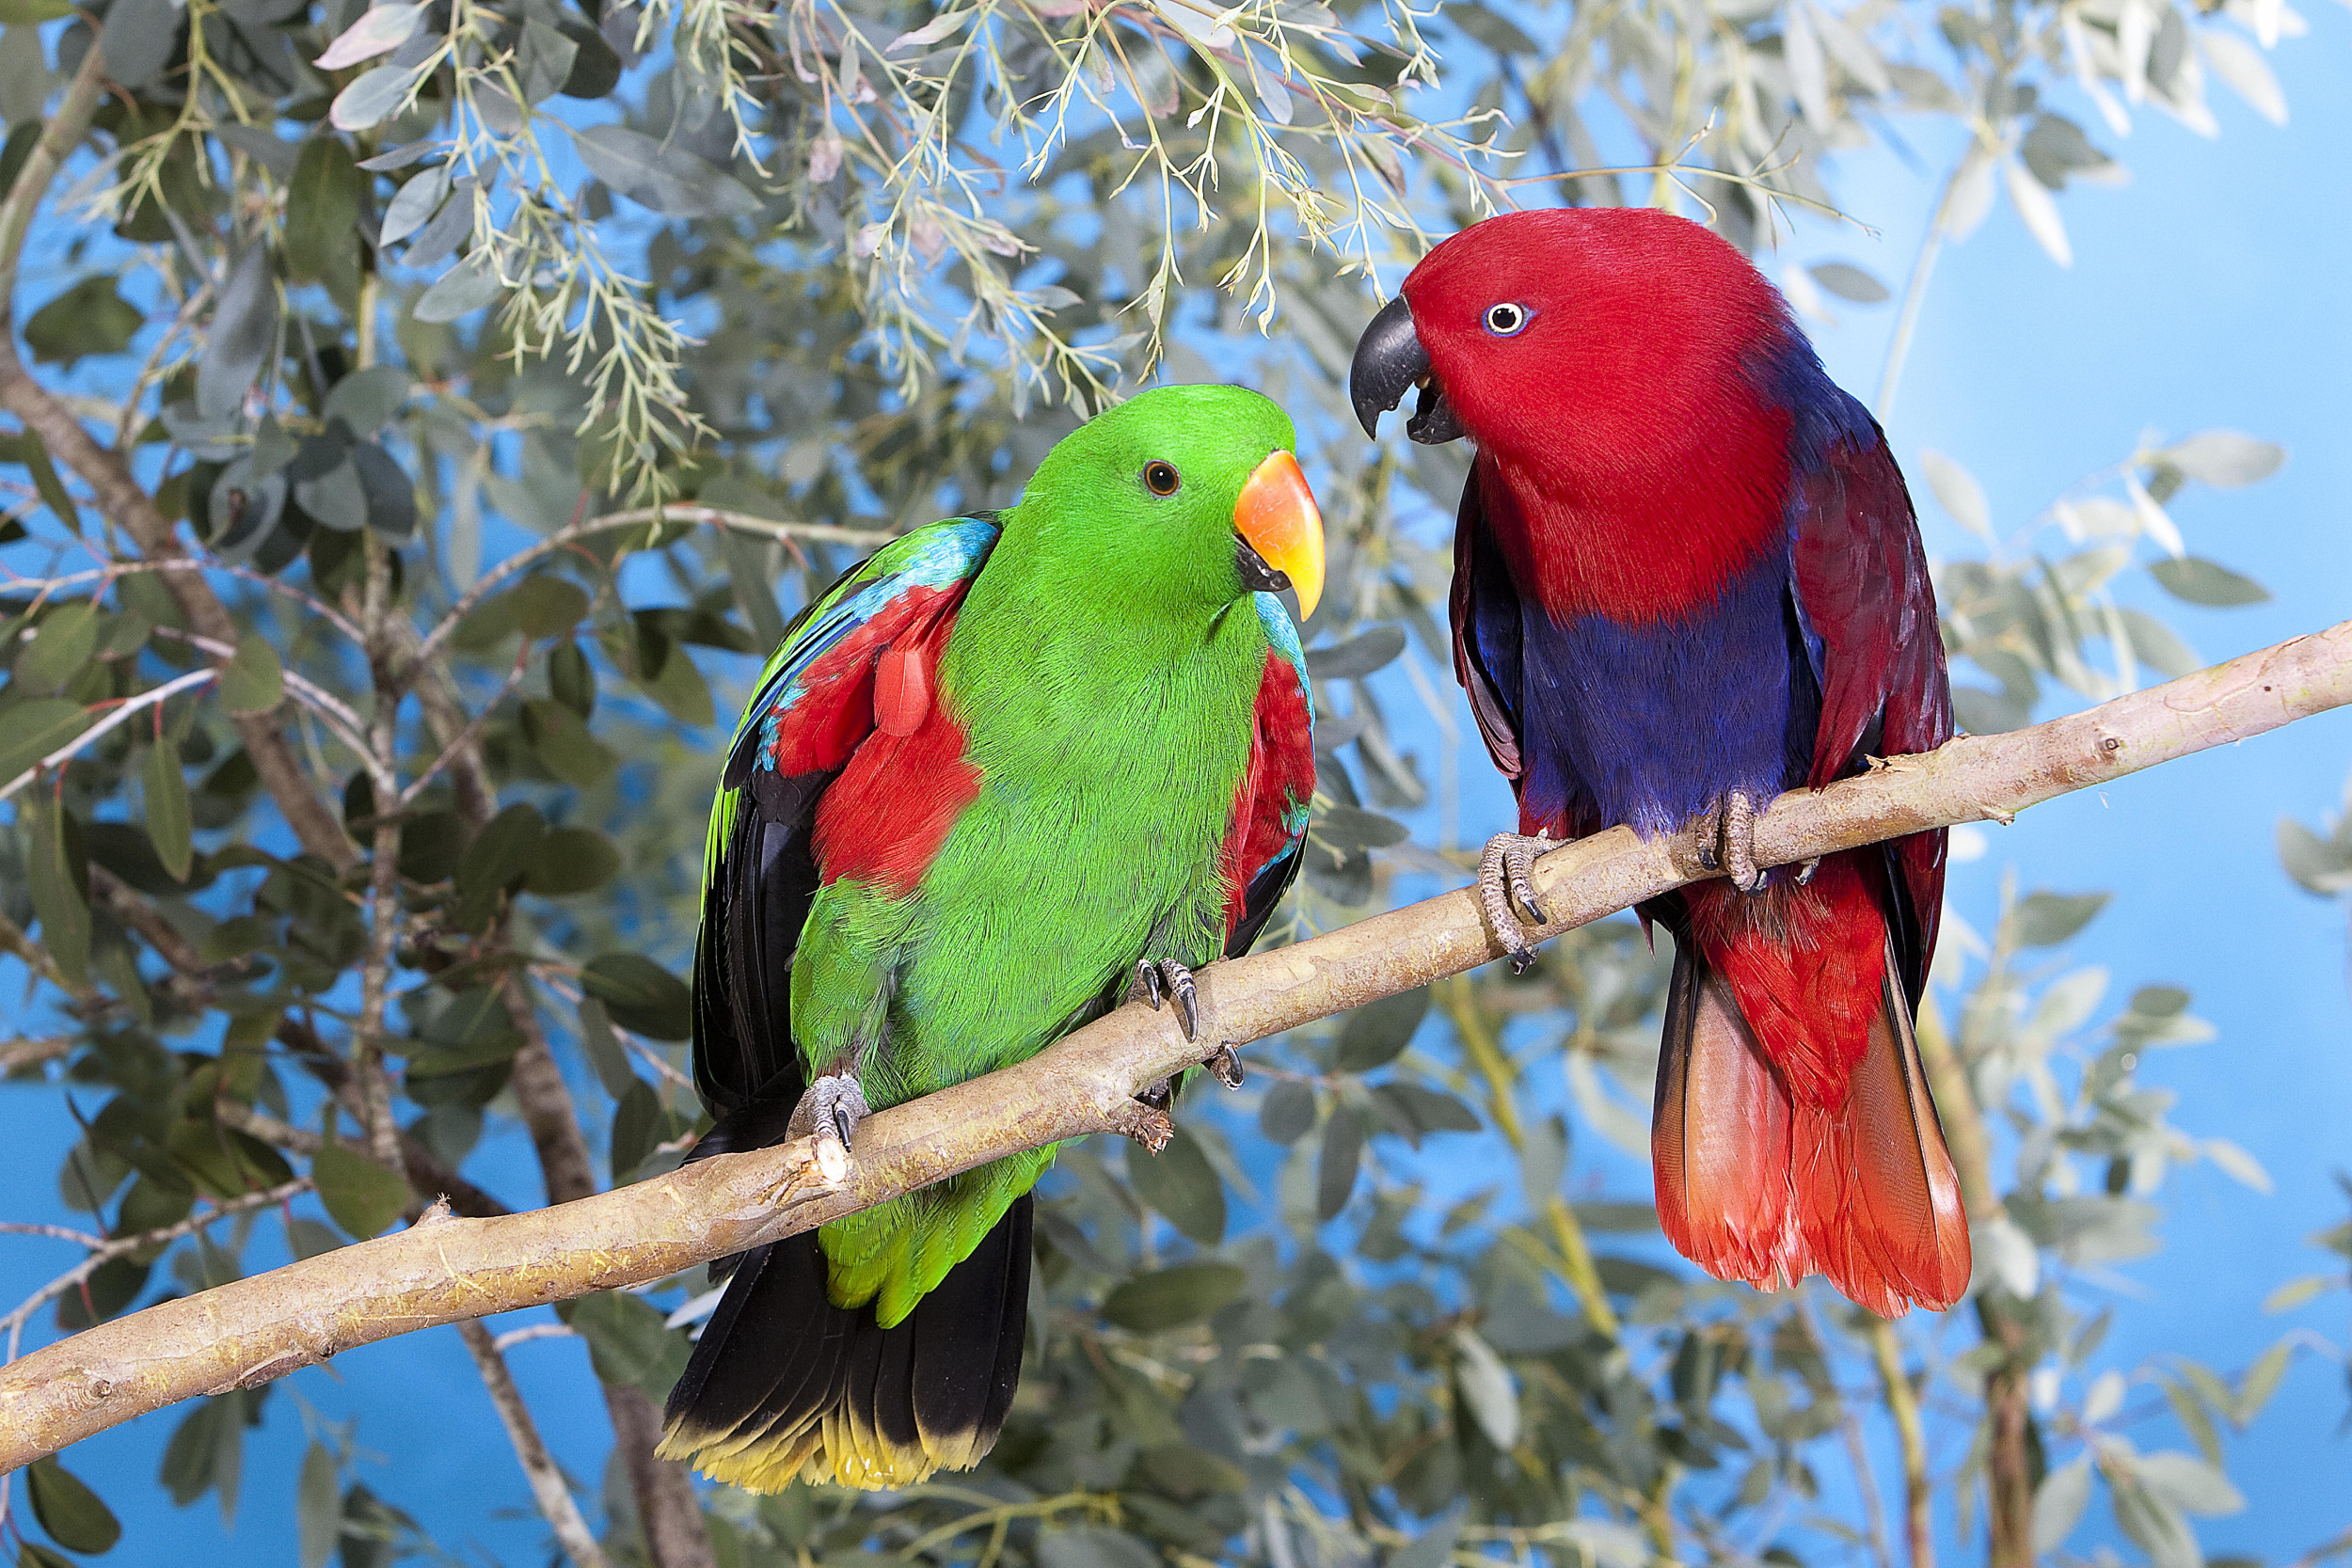 Social Media Helps Sounds of Endangered Birds to No. 5 on the Australian Music Charts